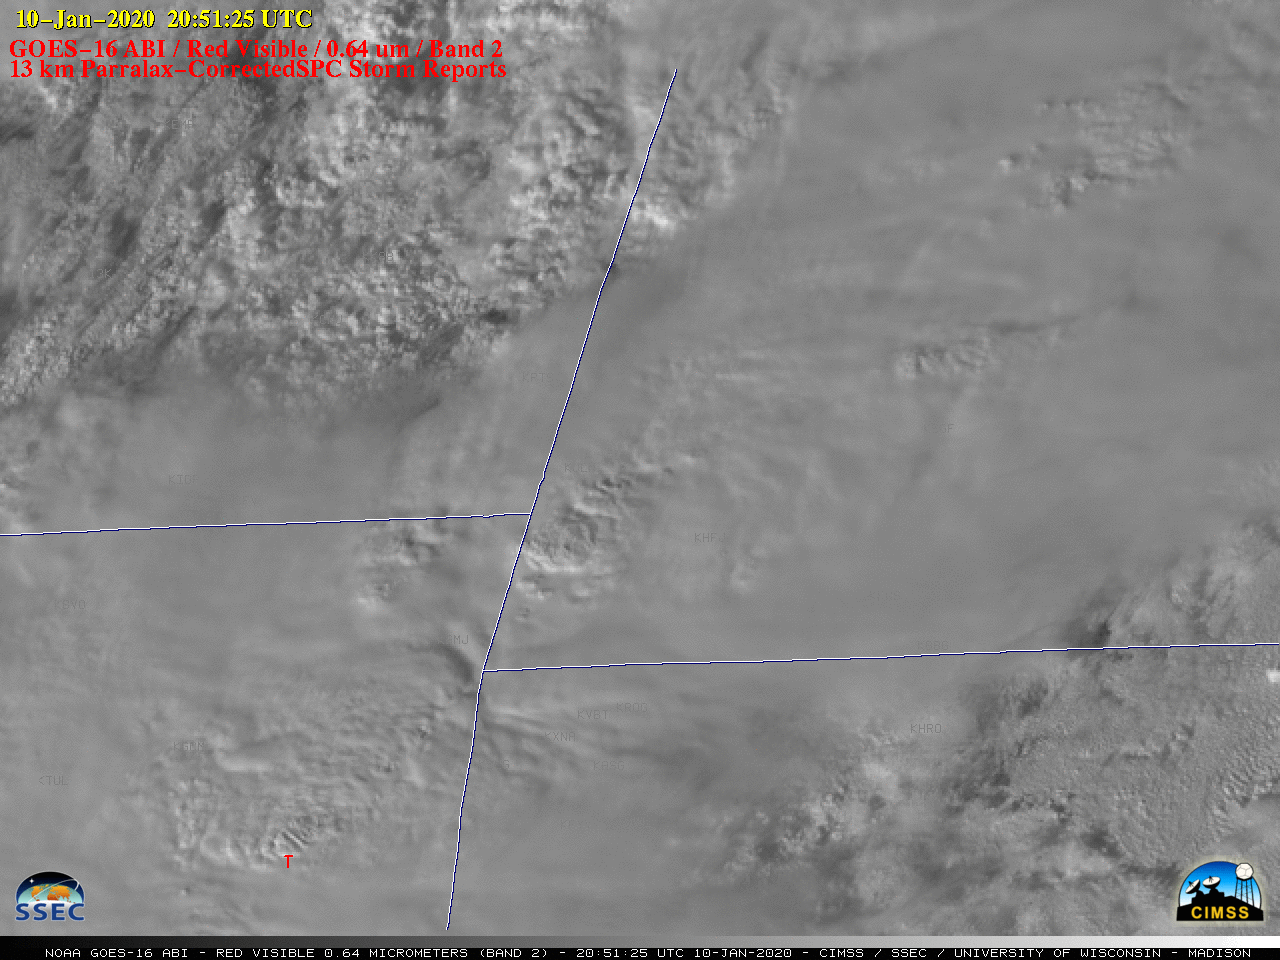 GOES-16 "Red" Visible (0.64 µm) image at 2051 UTC, including plot of Tornado report (with and without parallax correction) [click to enlarge]